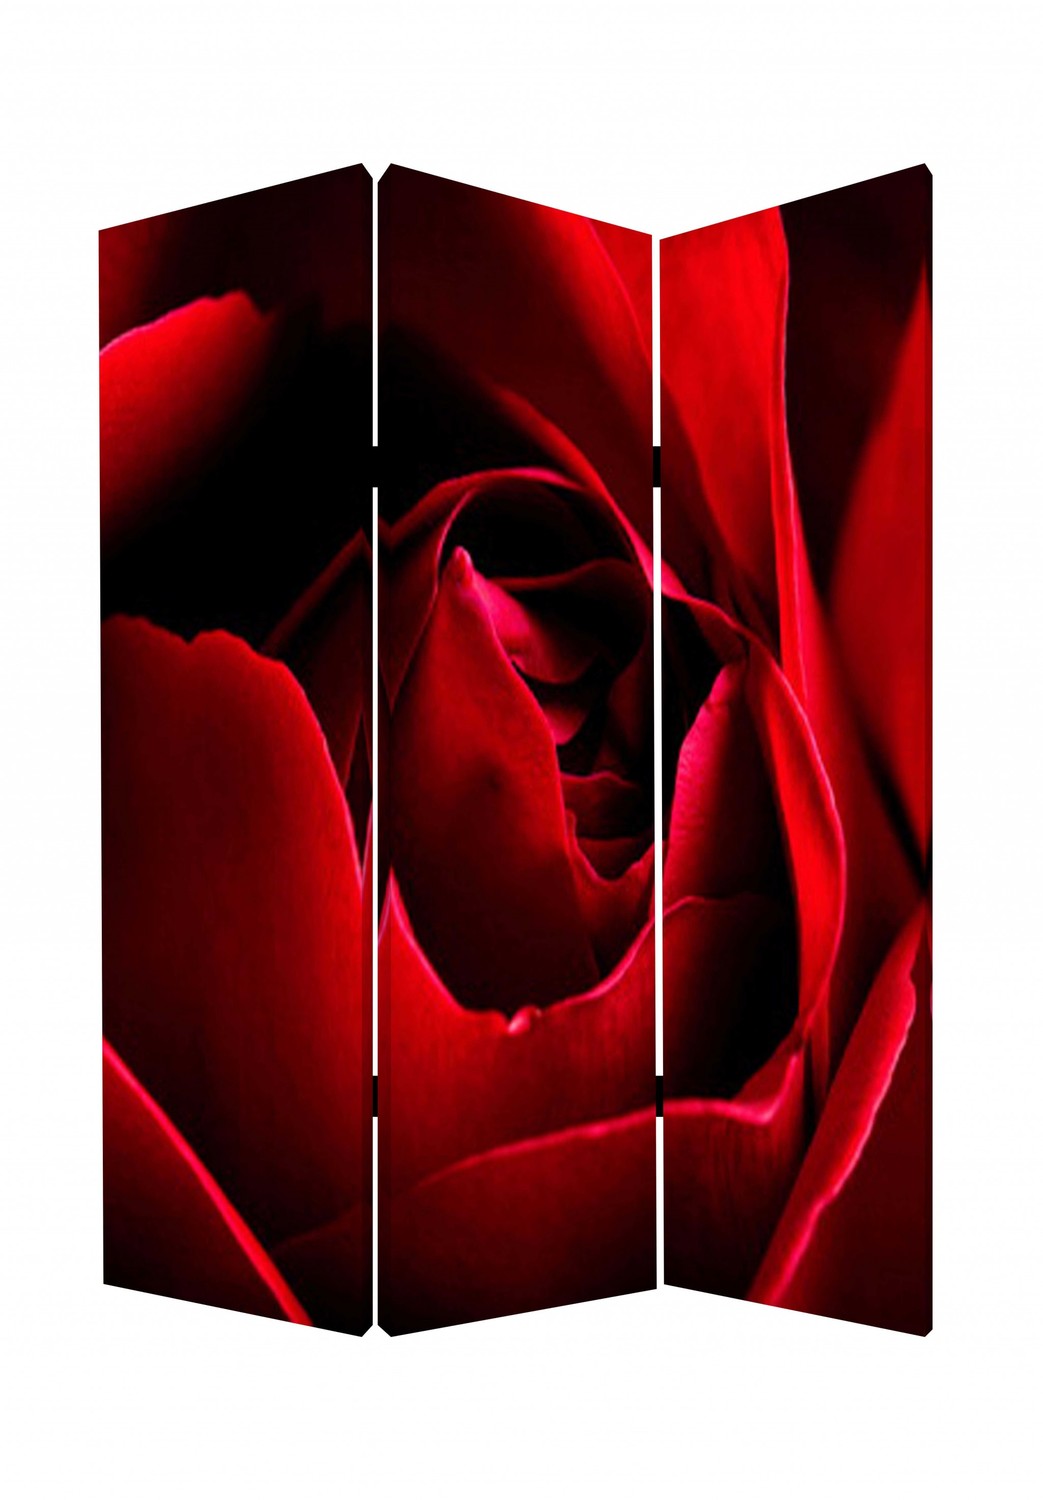 1" x 48" x 72" Multi Color Wood Canvas Rose Screen